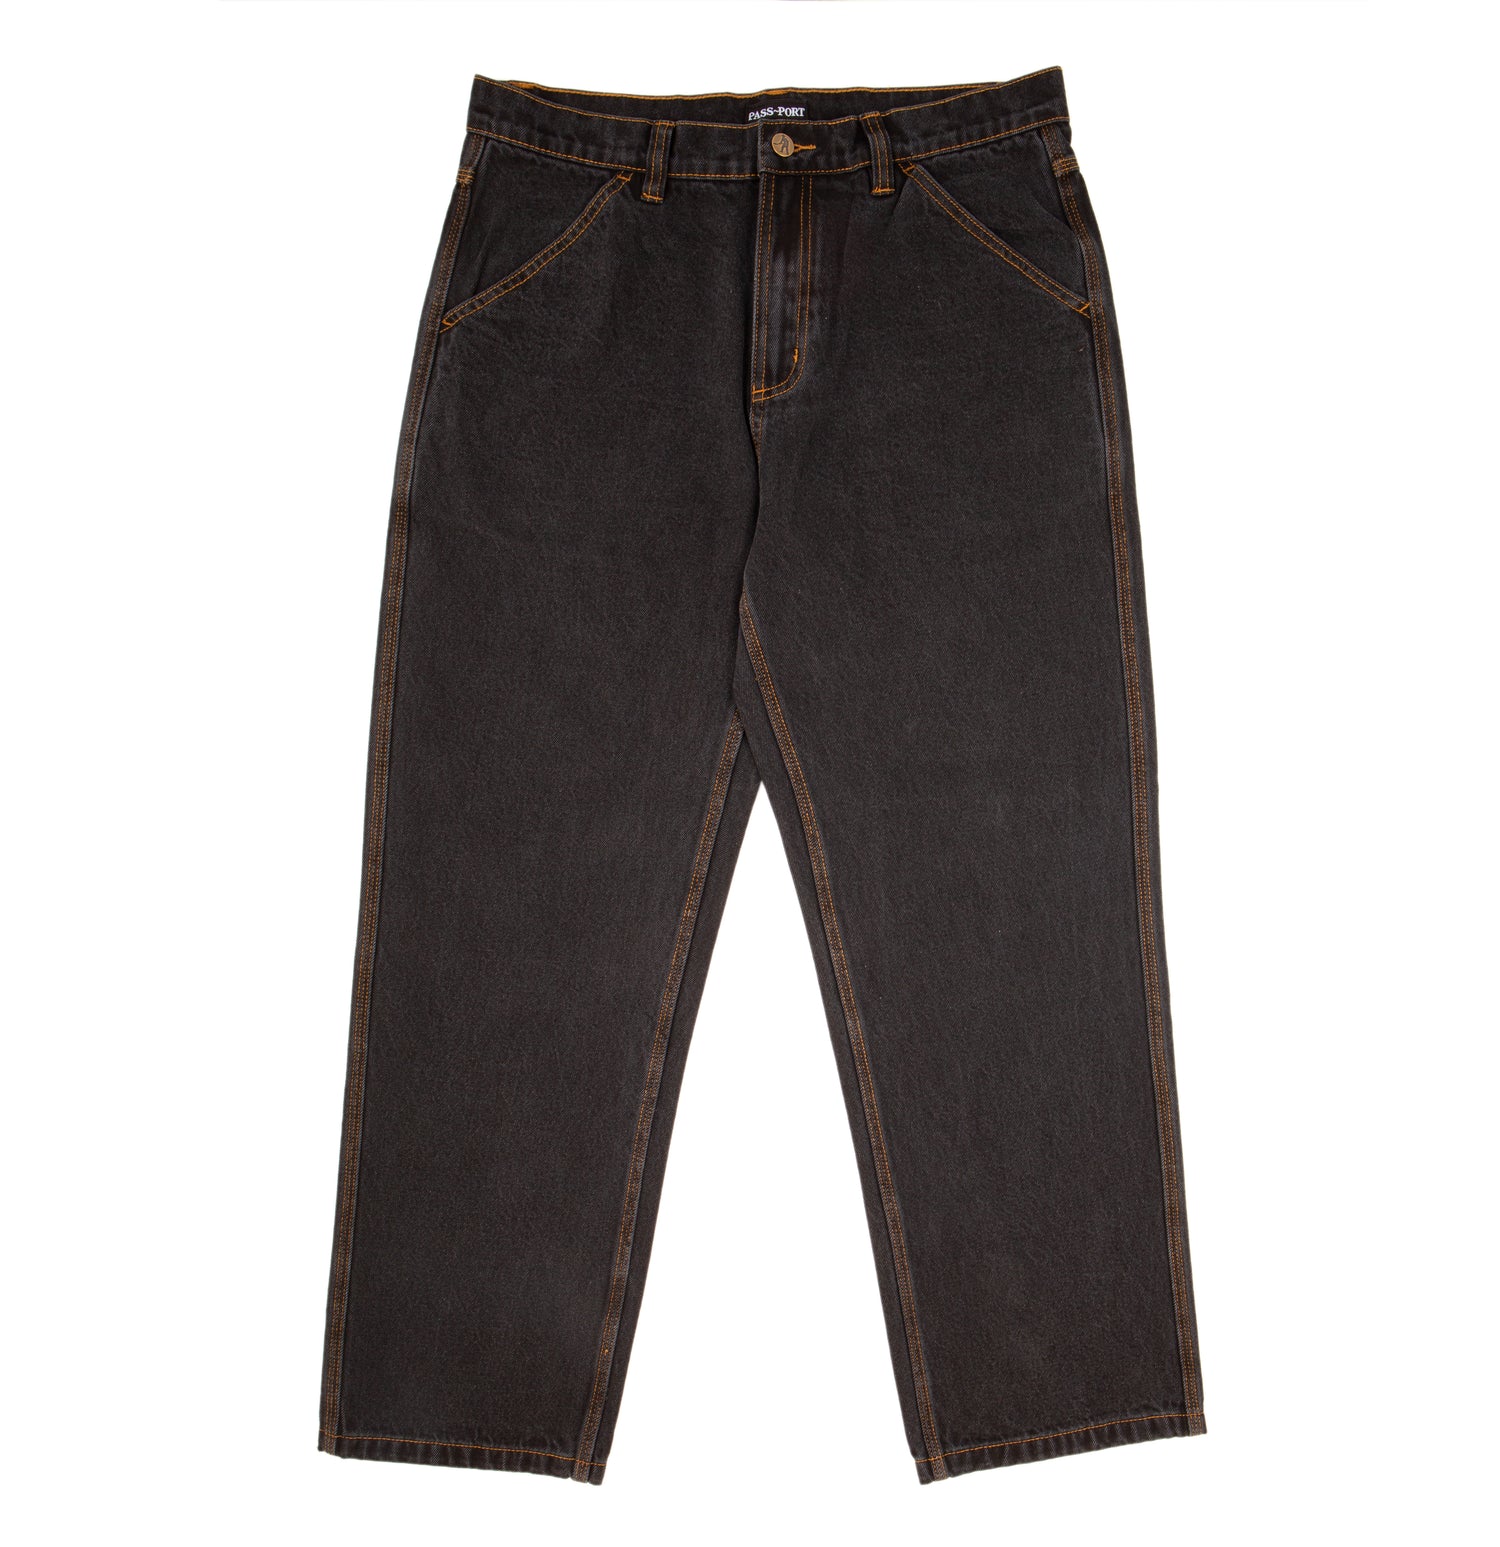 Workers Club Jean, Washed Black